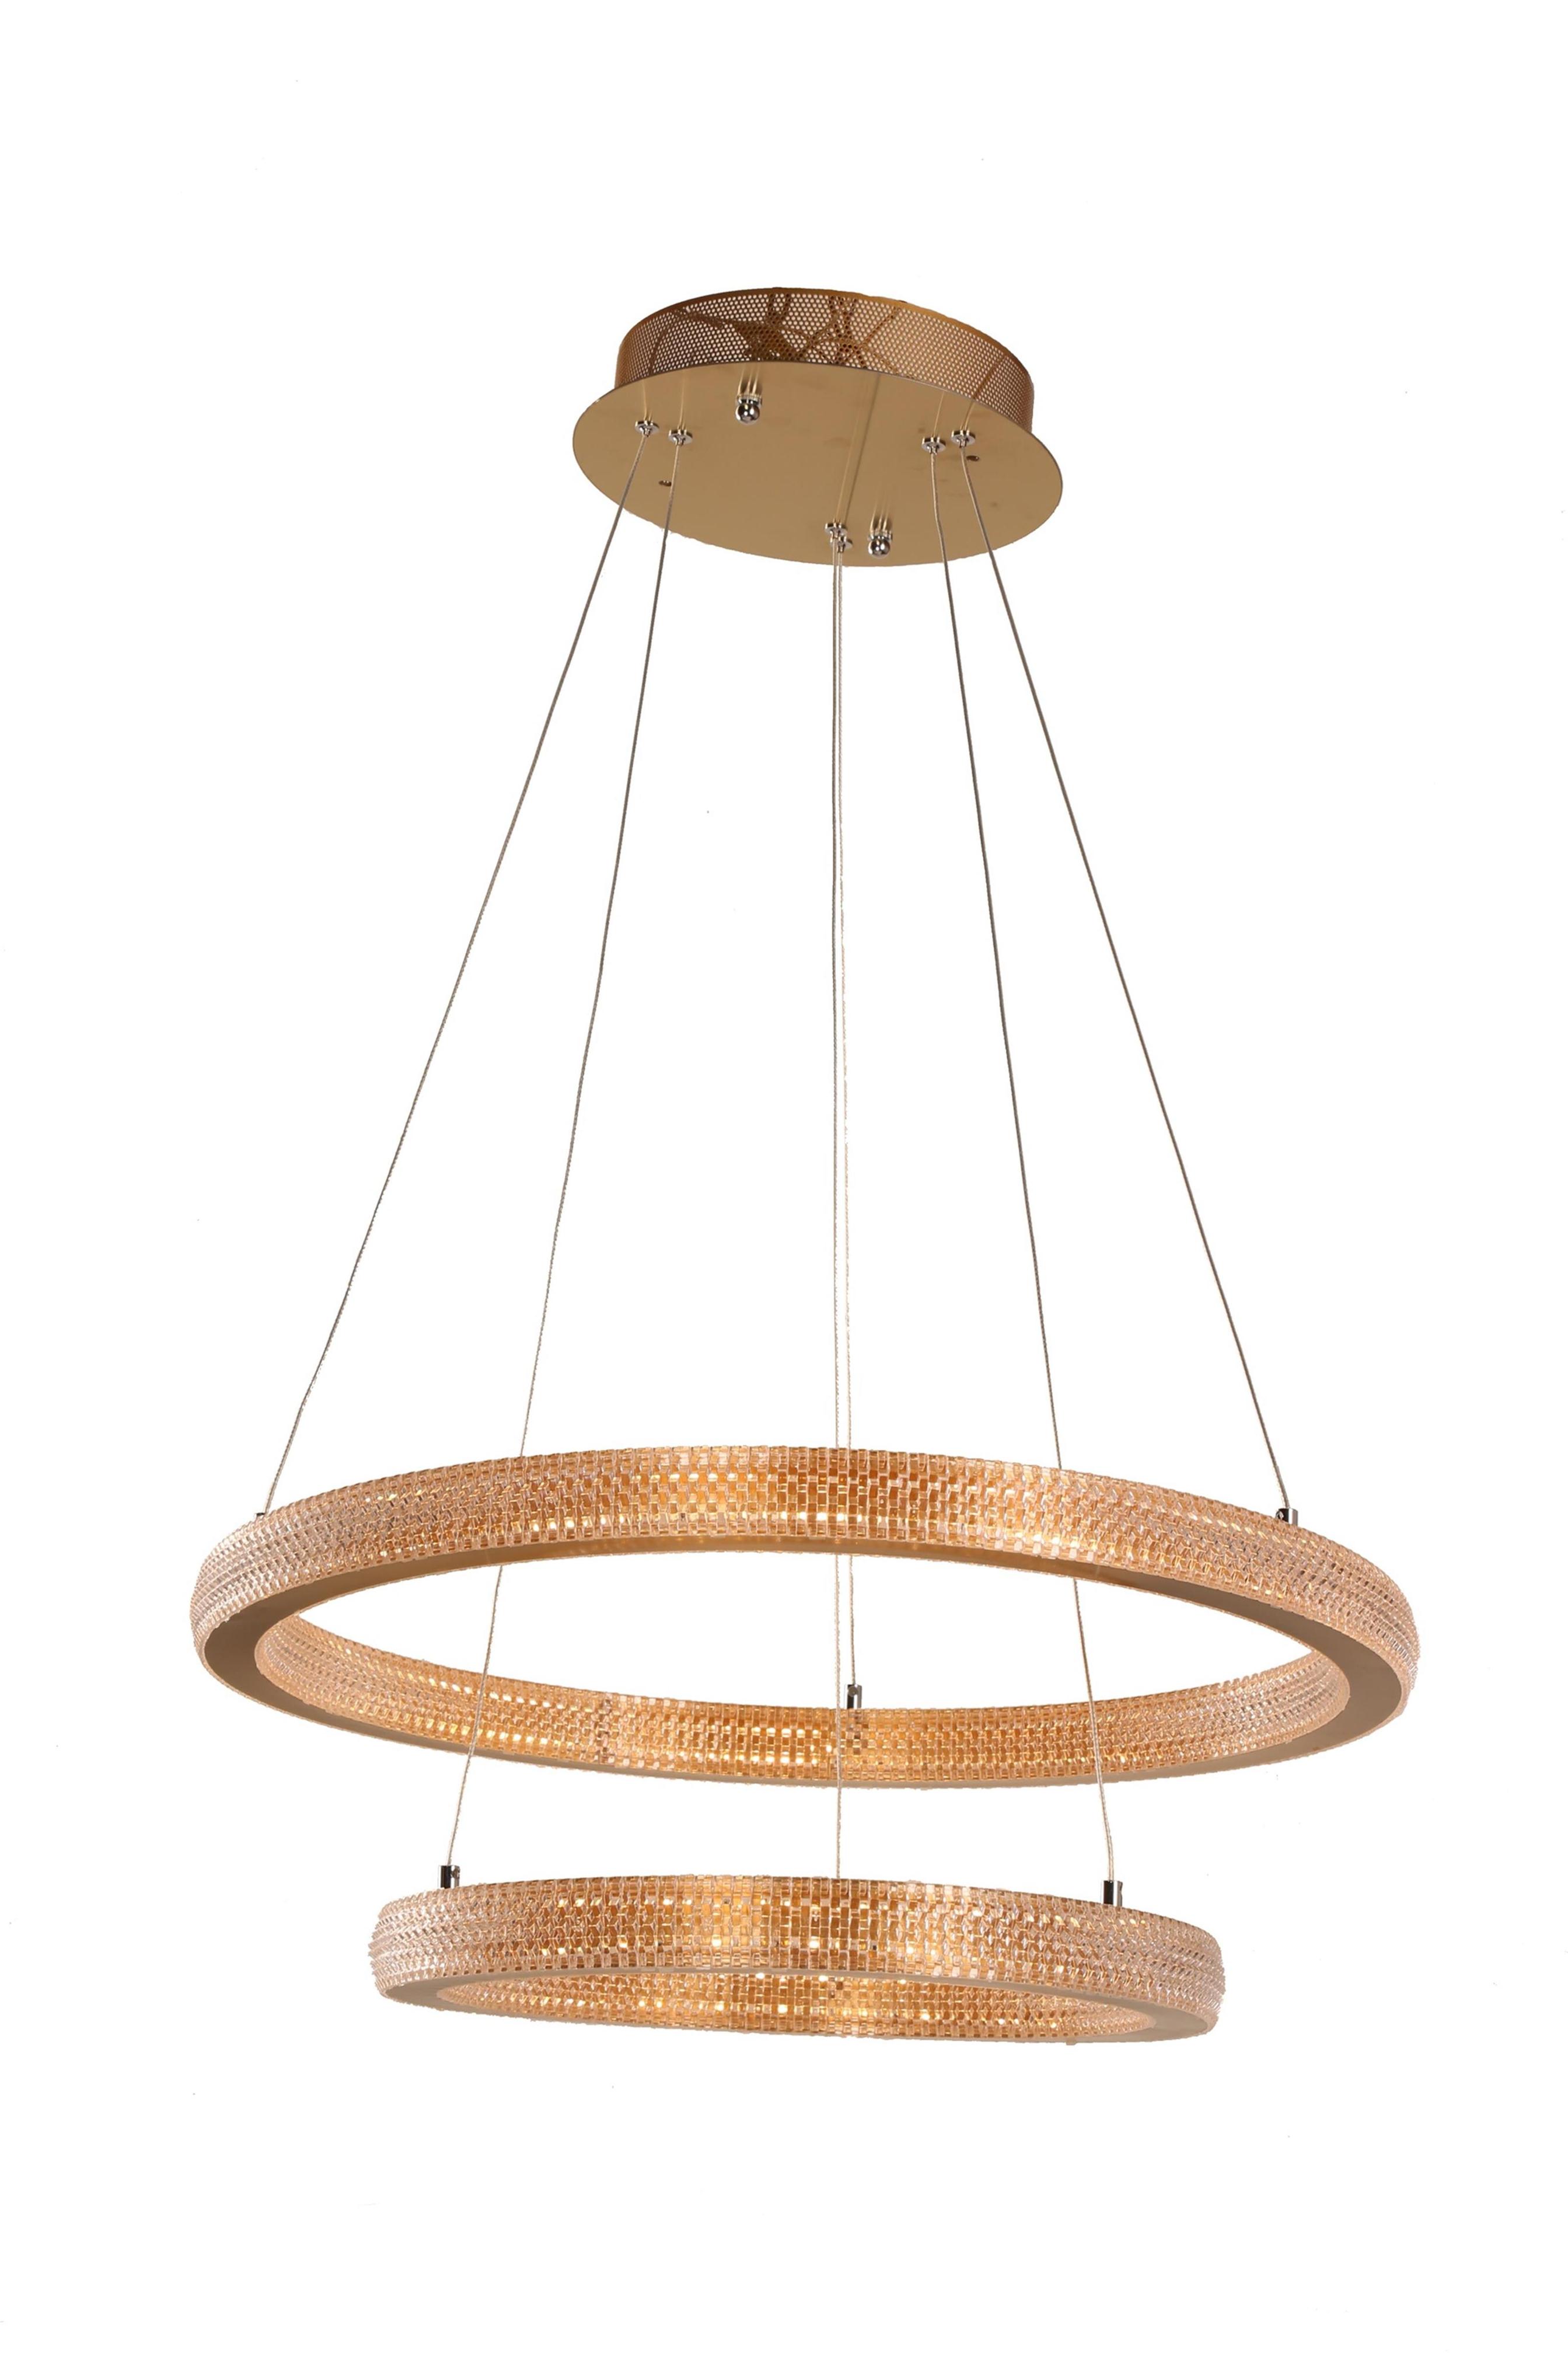 Saintly 66663a24w modern hanging lights free quote for kitchen island